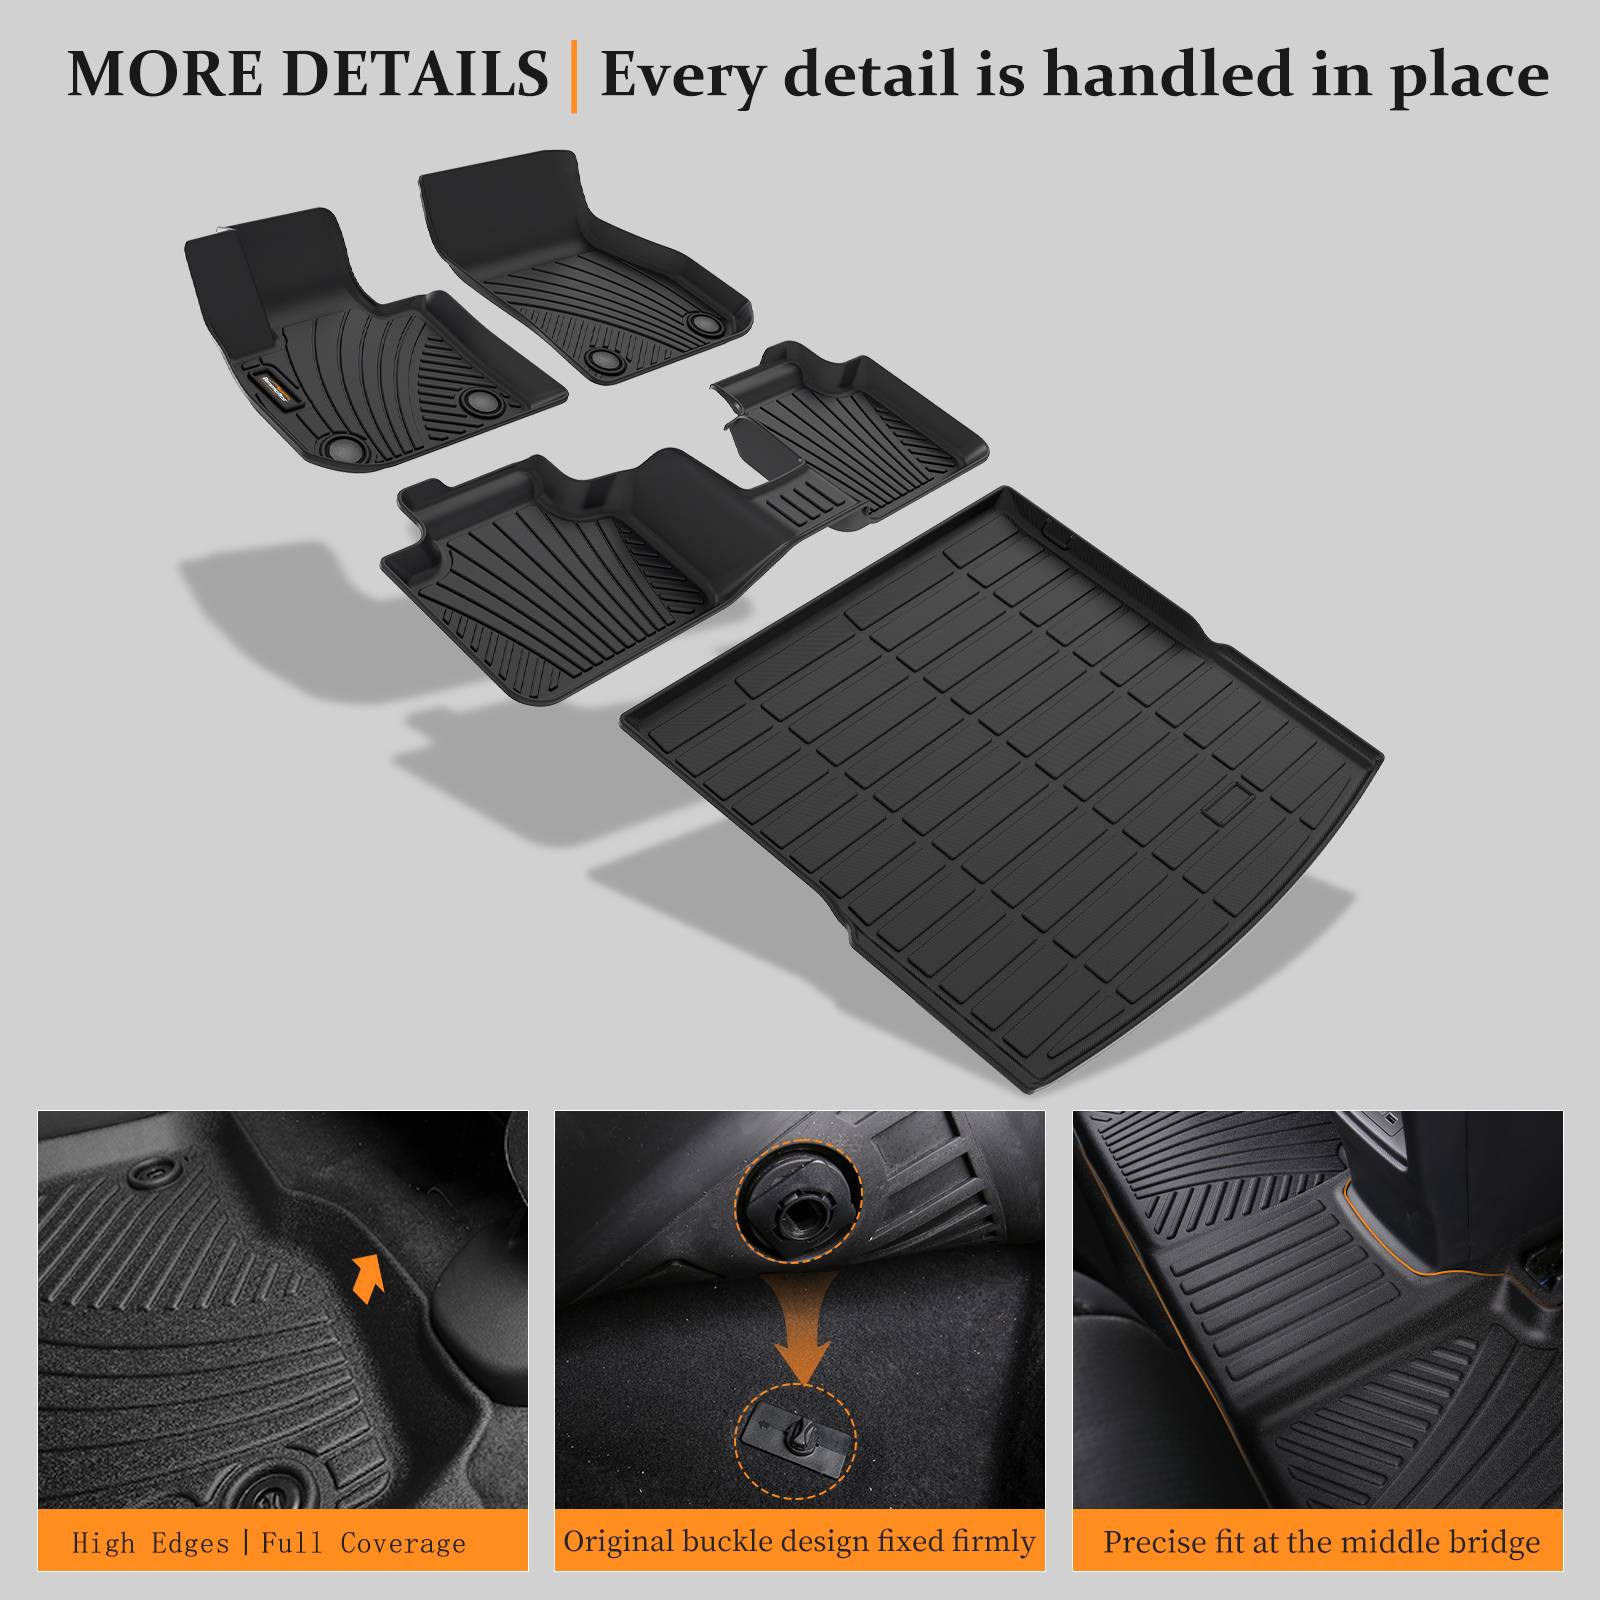 Binmotor-Custom Floor Mats Fit for Jeep Gladiator, All Weather Mats TPE Rubber Liners for Gladiator Car Accessories Car Mats（compatible year 2020-2024）